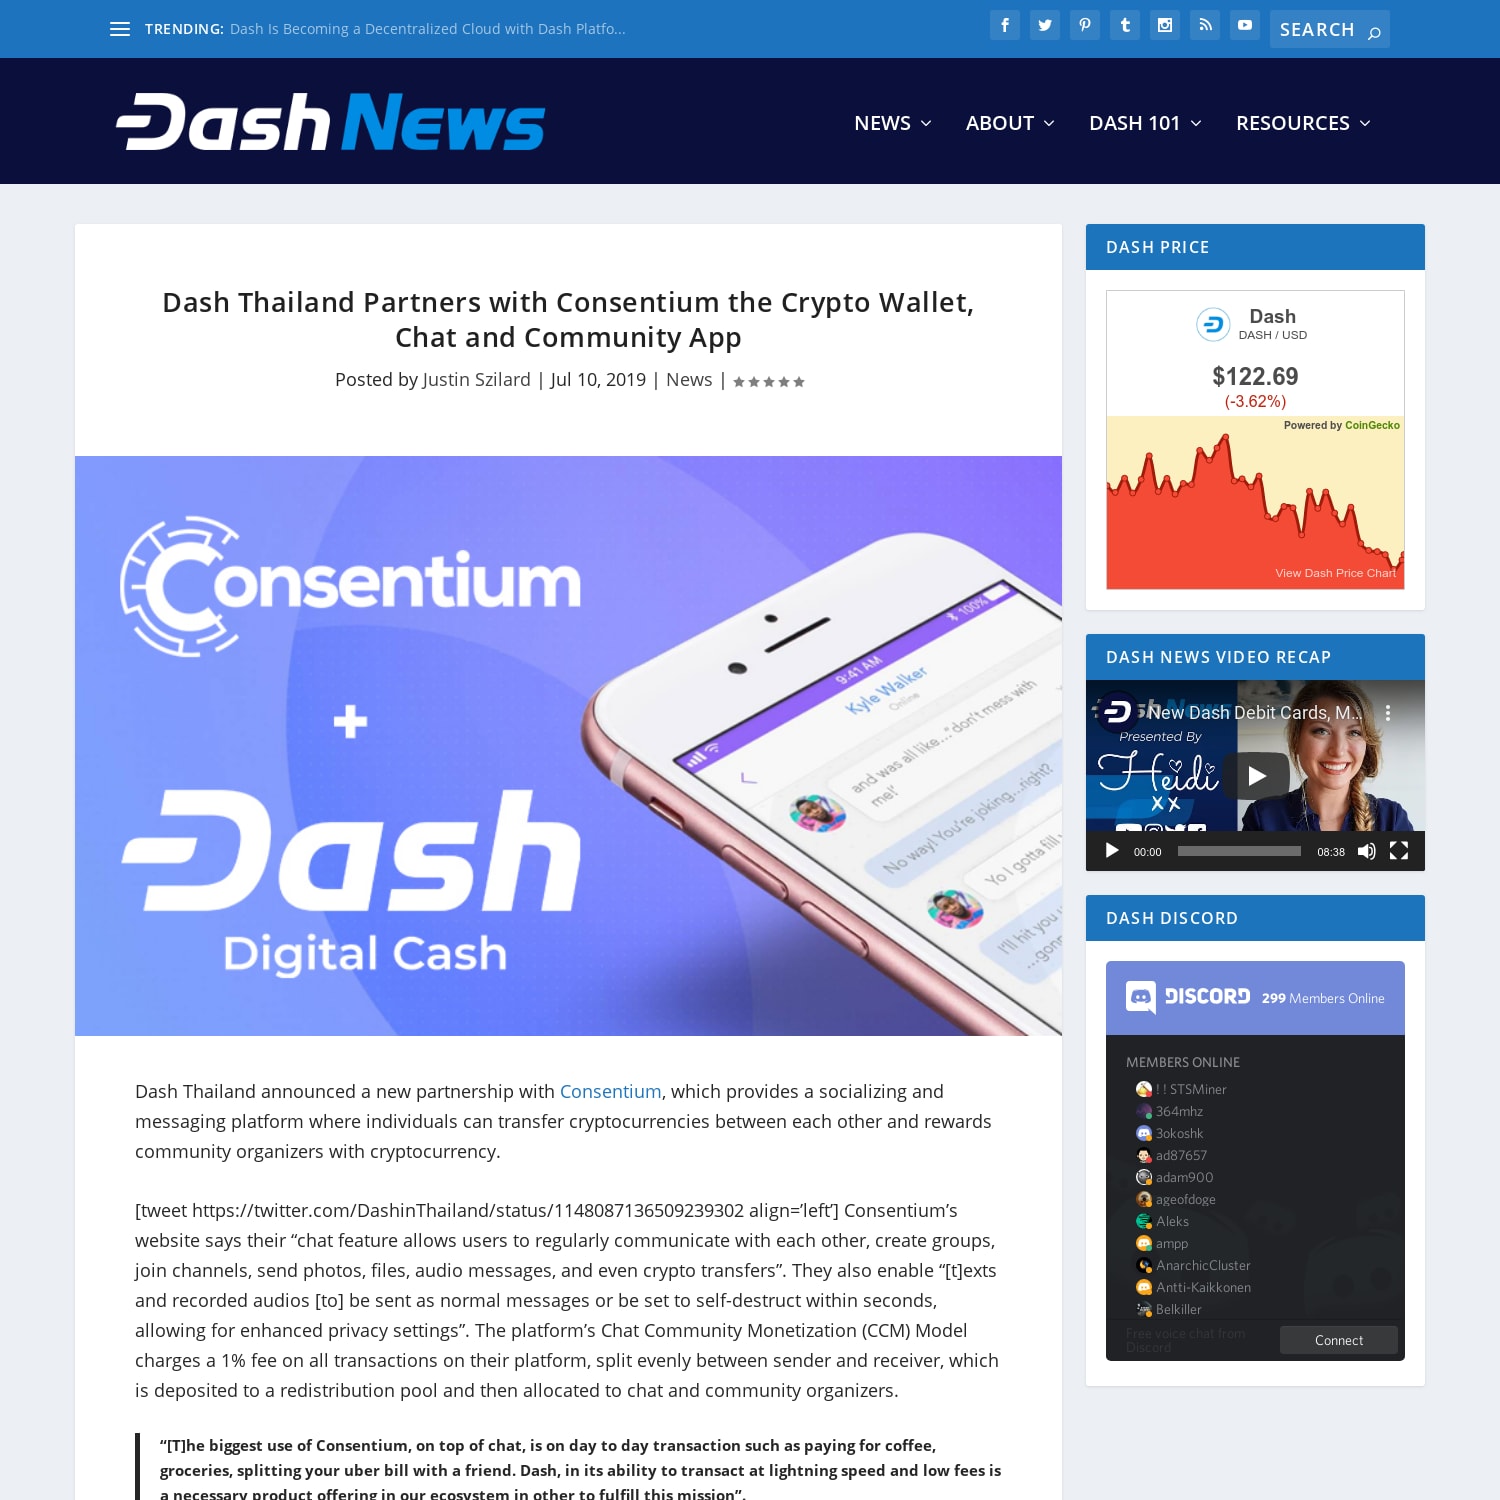 Dash Thailand Partners with Consentium the Crypto Wallet, Chat and Community App